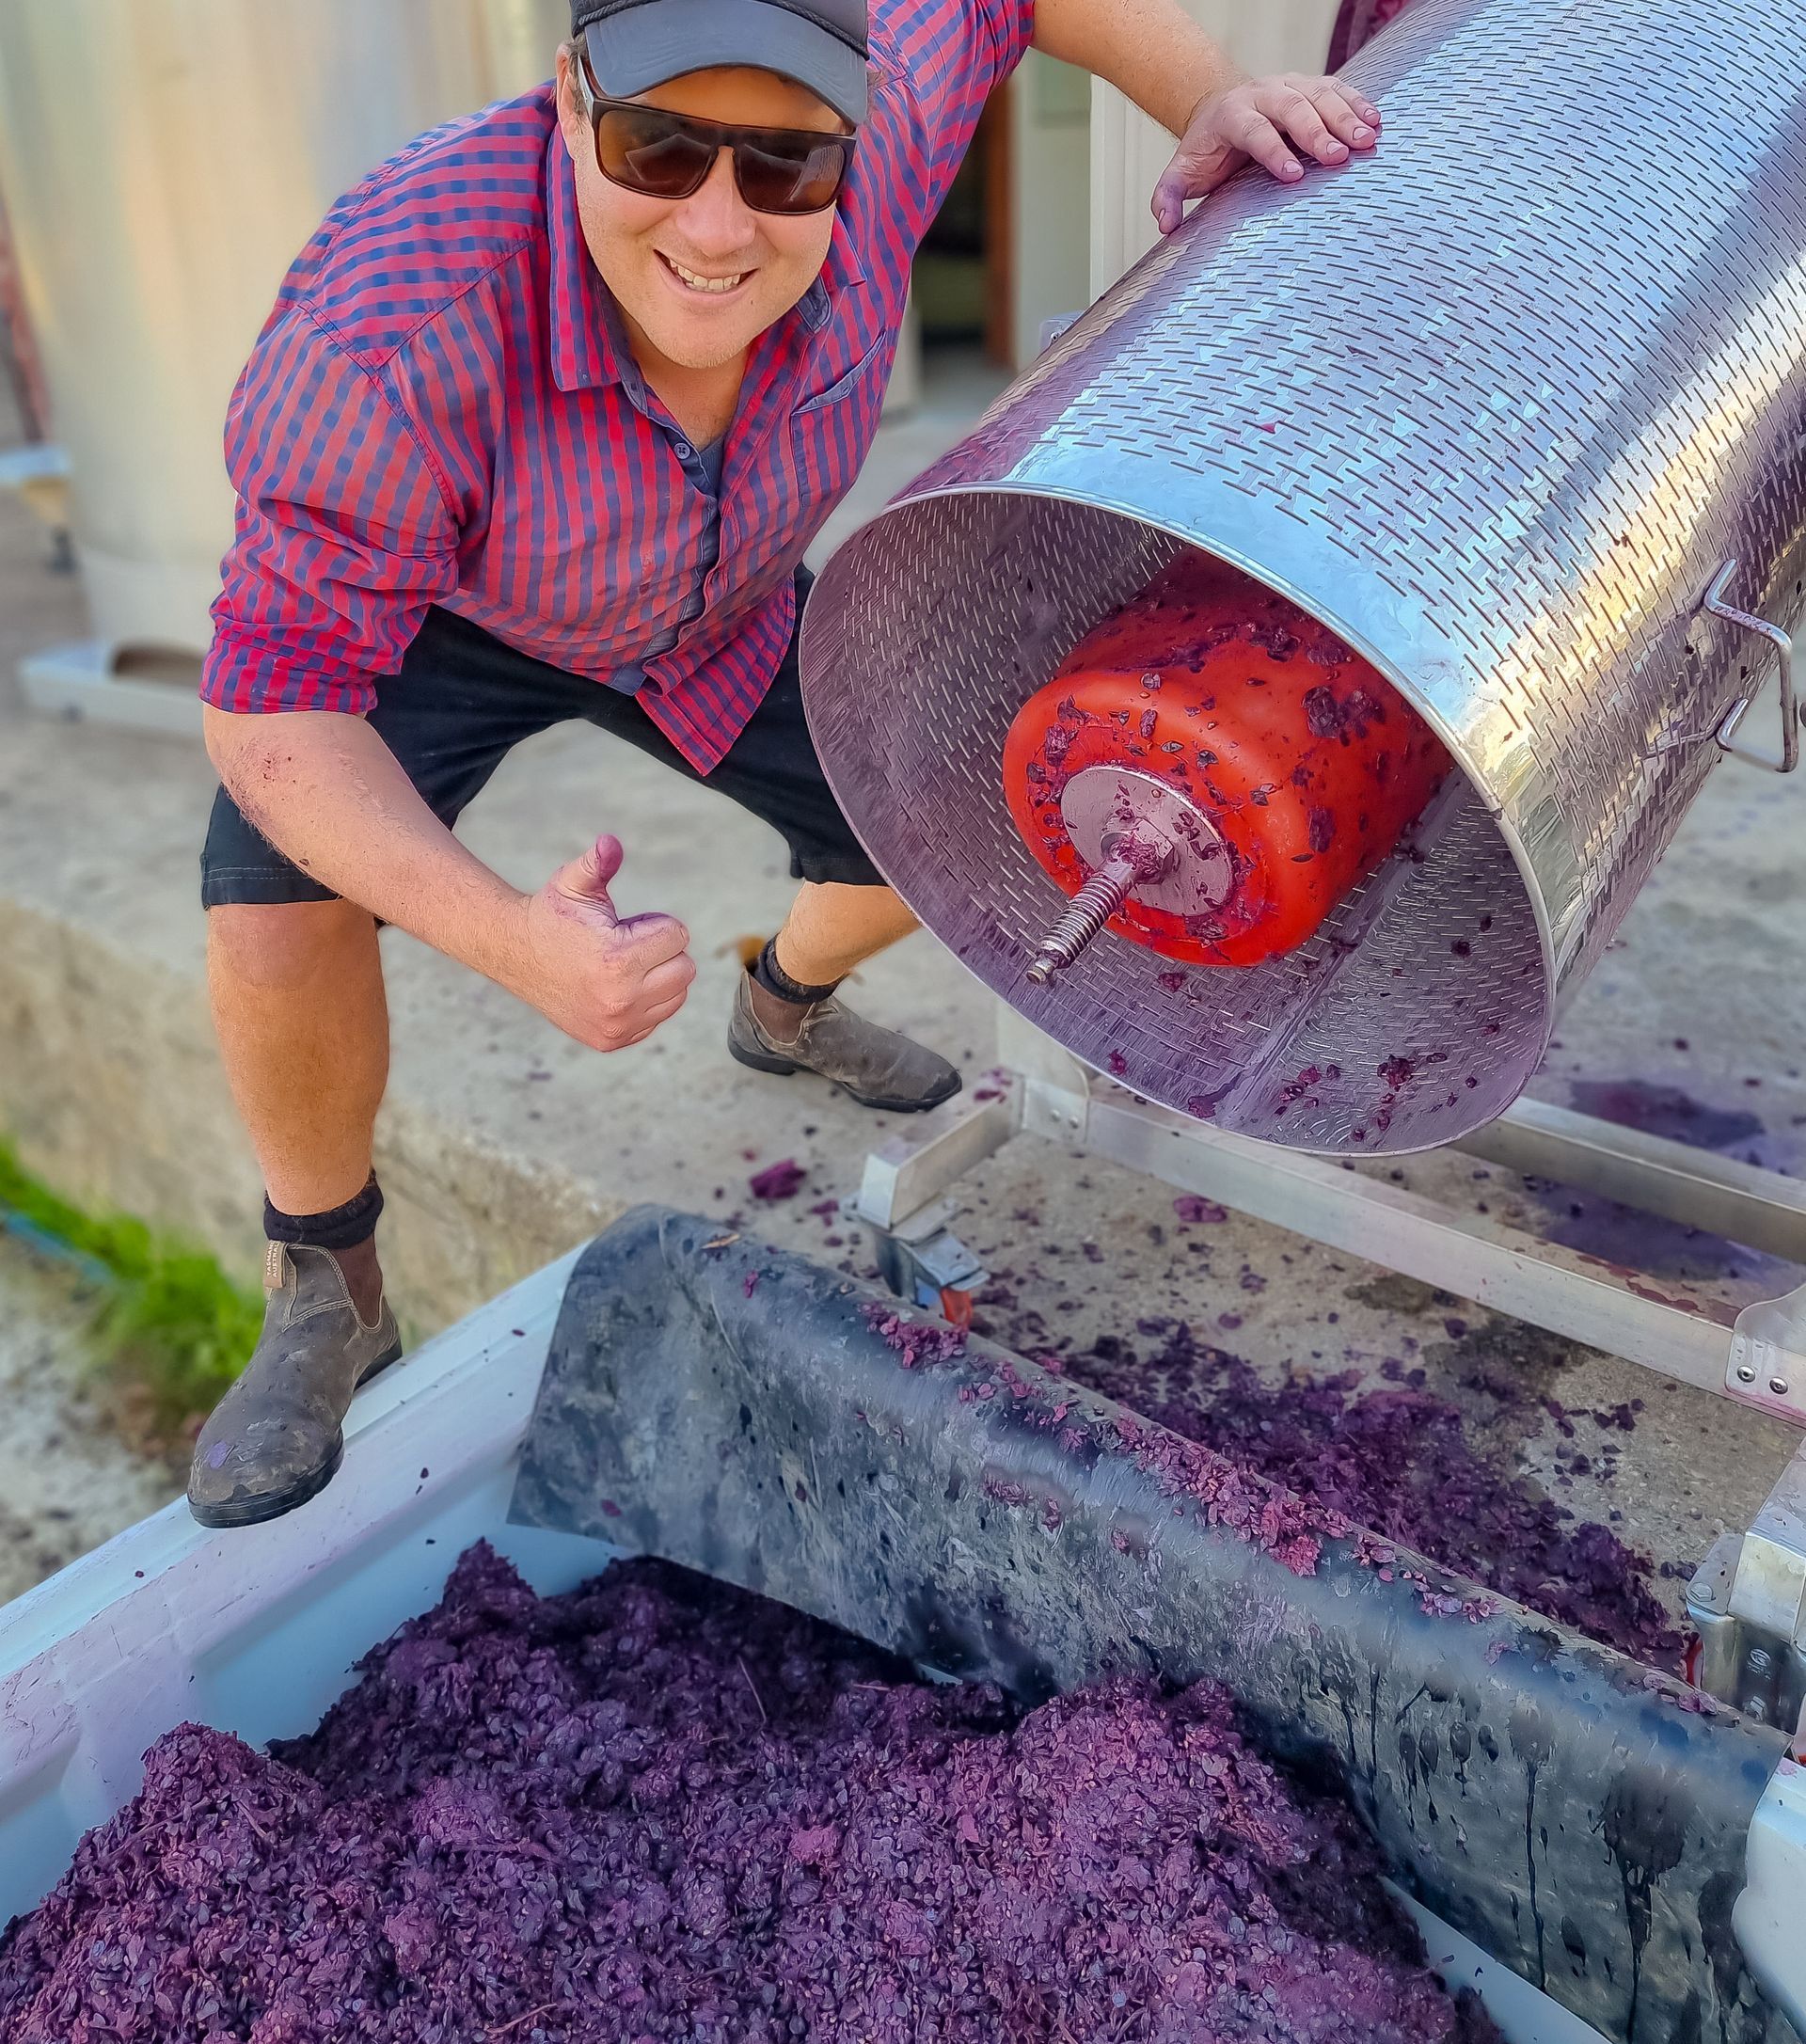 Scott giving a thumbs up with our wine press